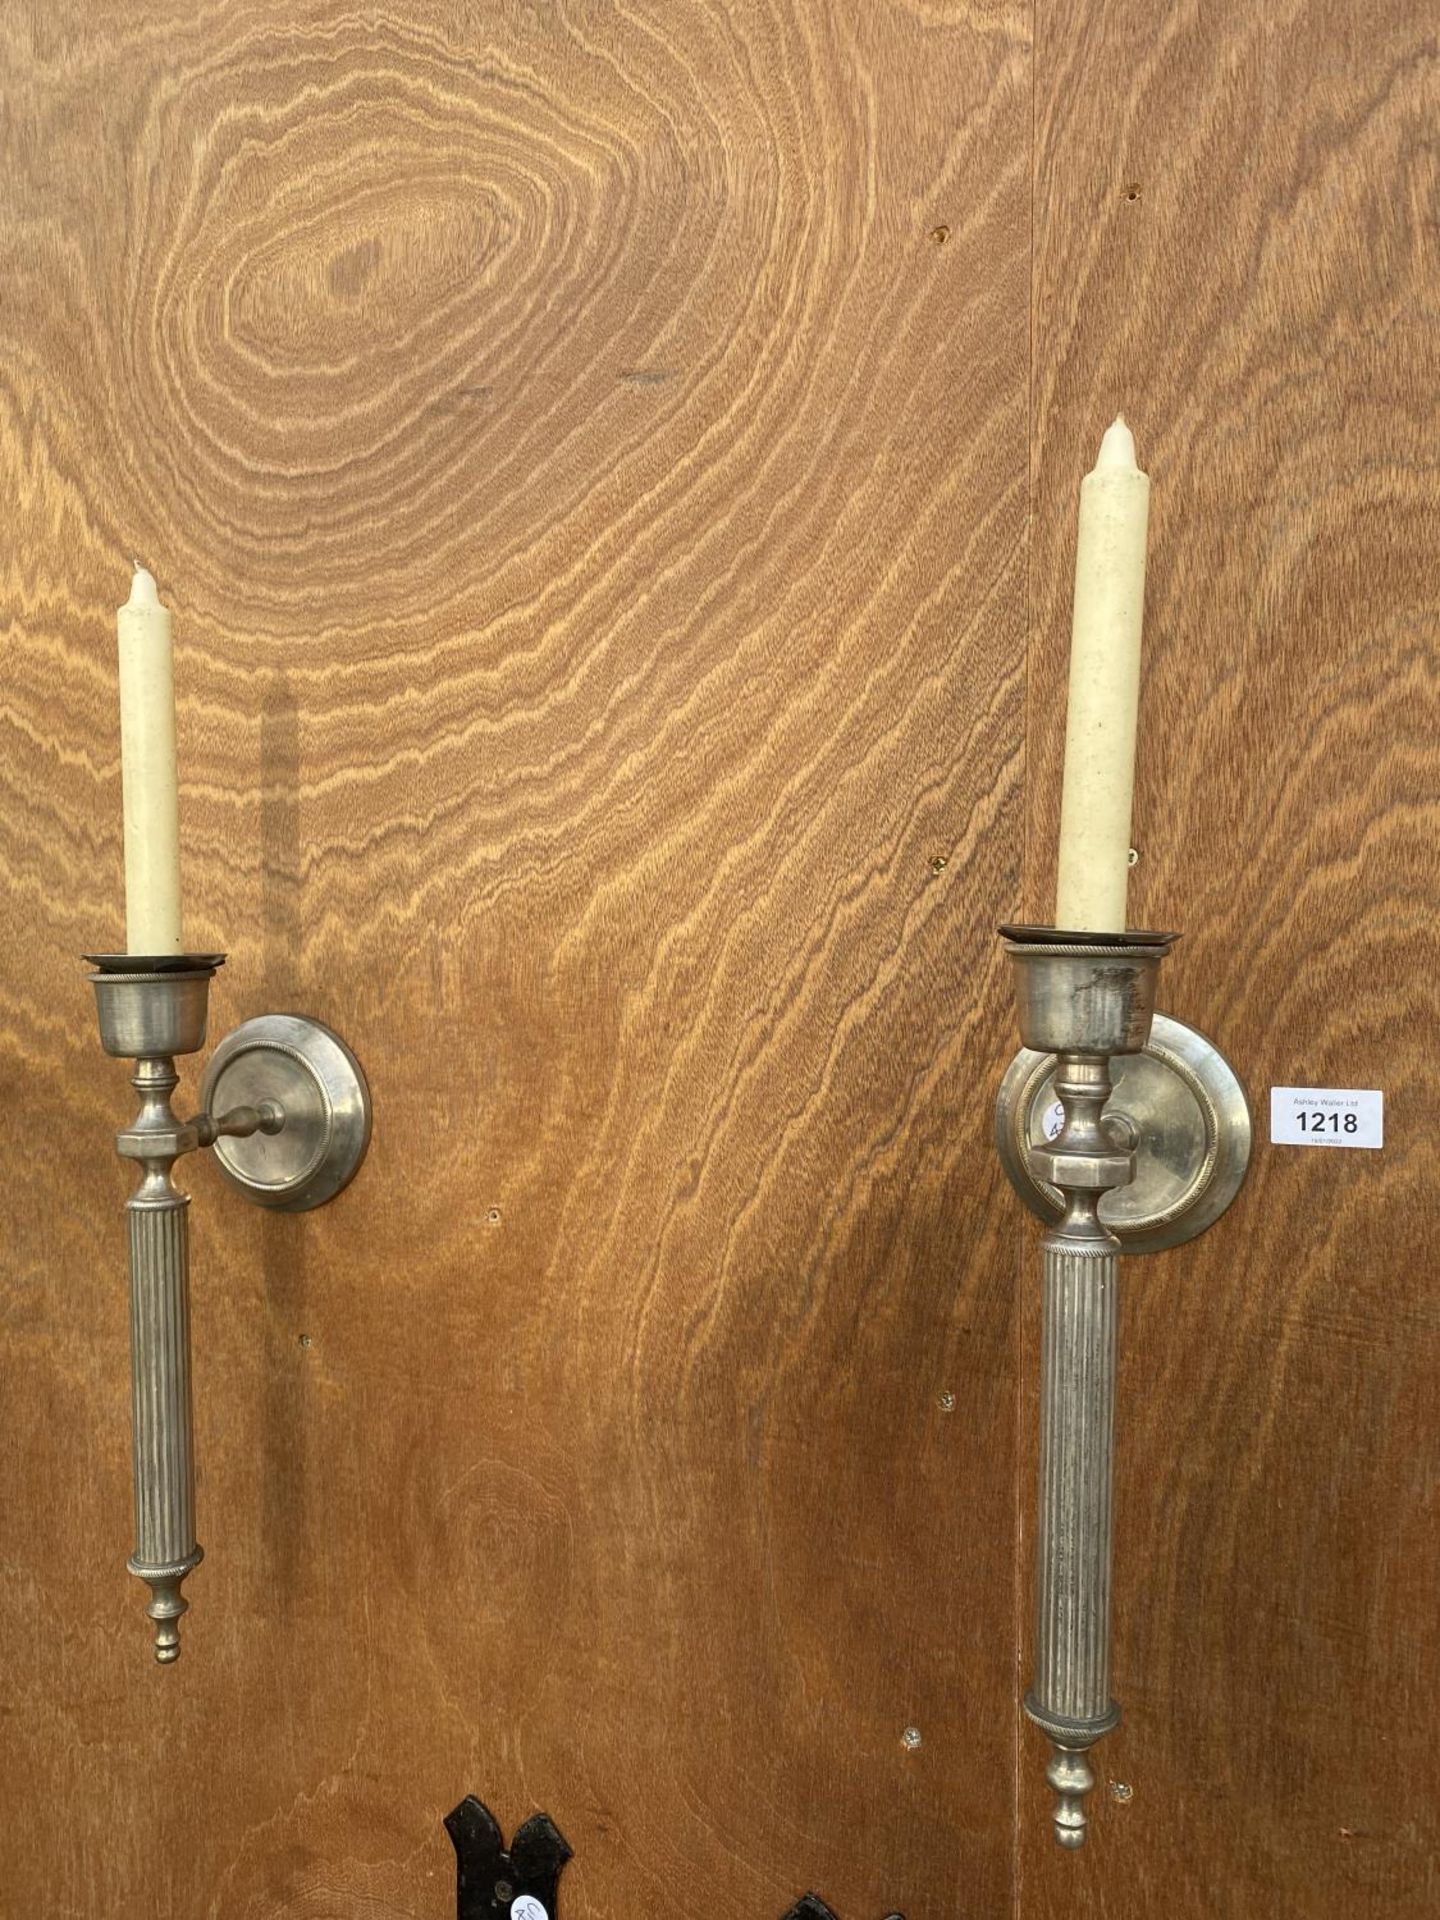 A PAIR OF VINTAGE NIKEL PLATED BRASS TORCHERY WALL SCONCES